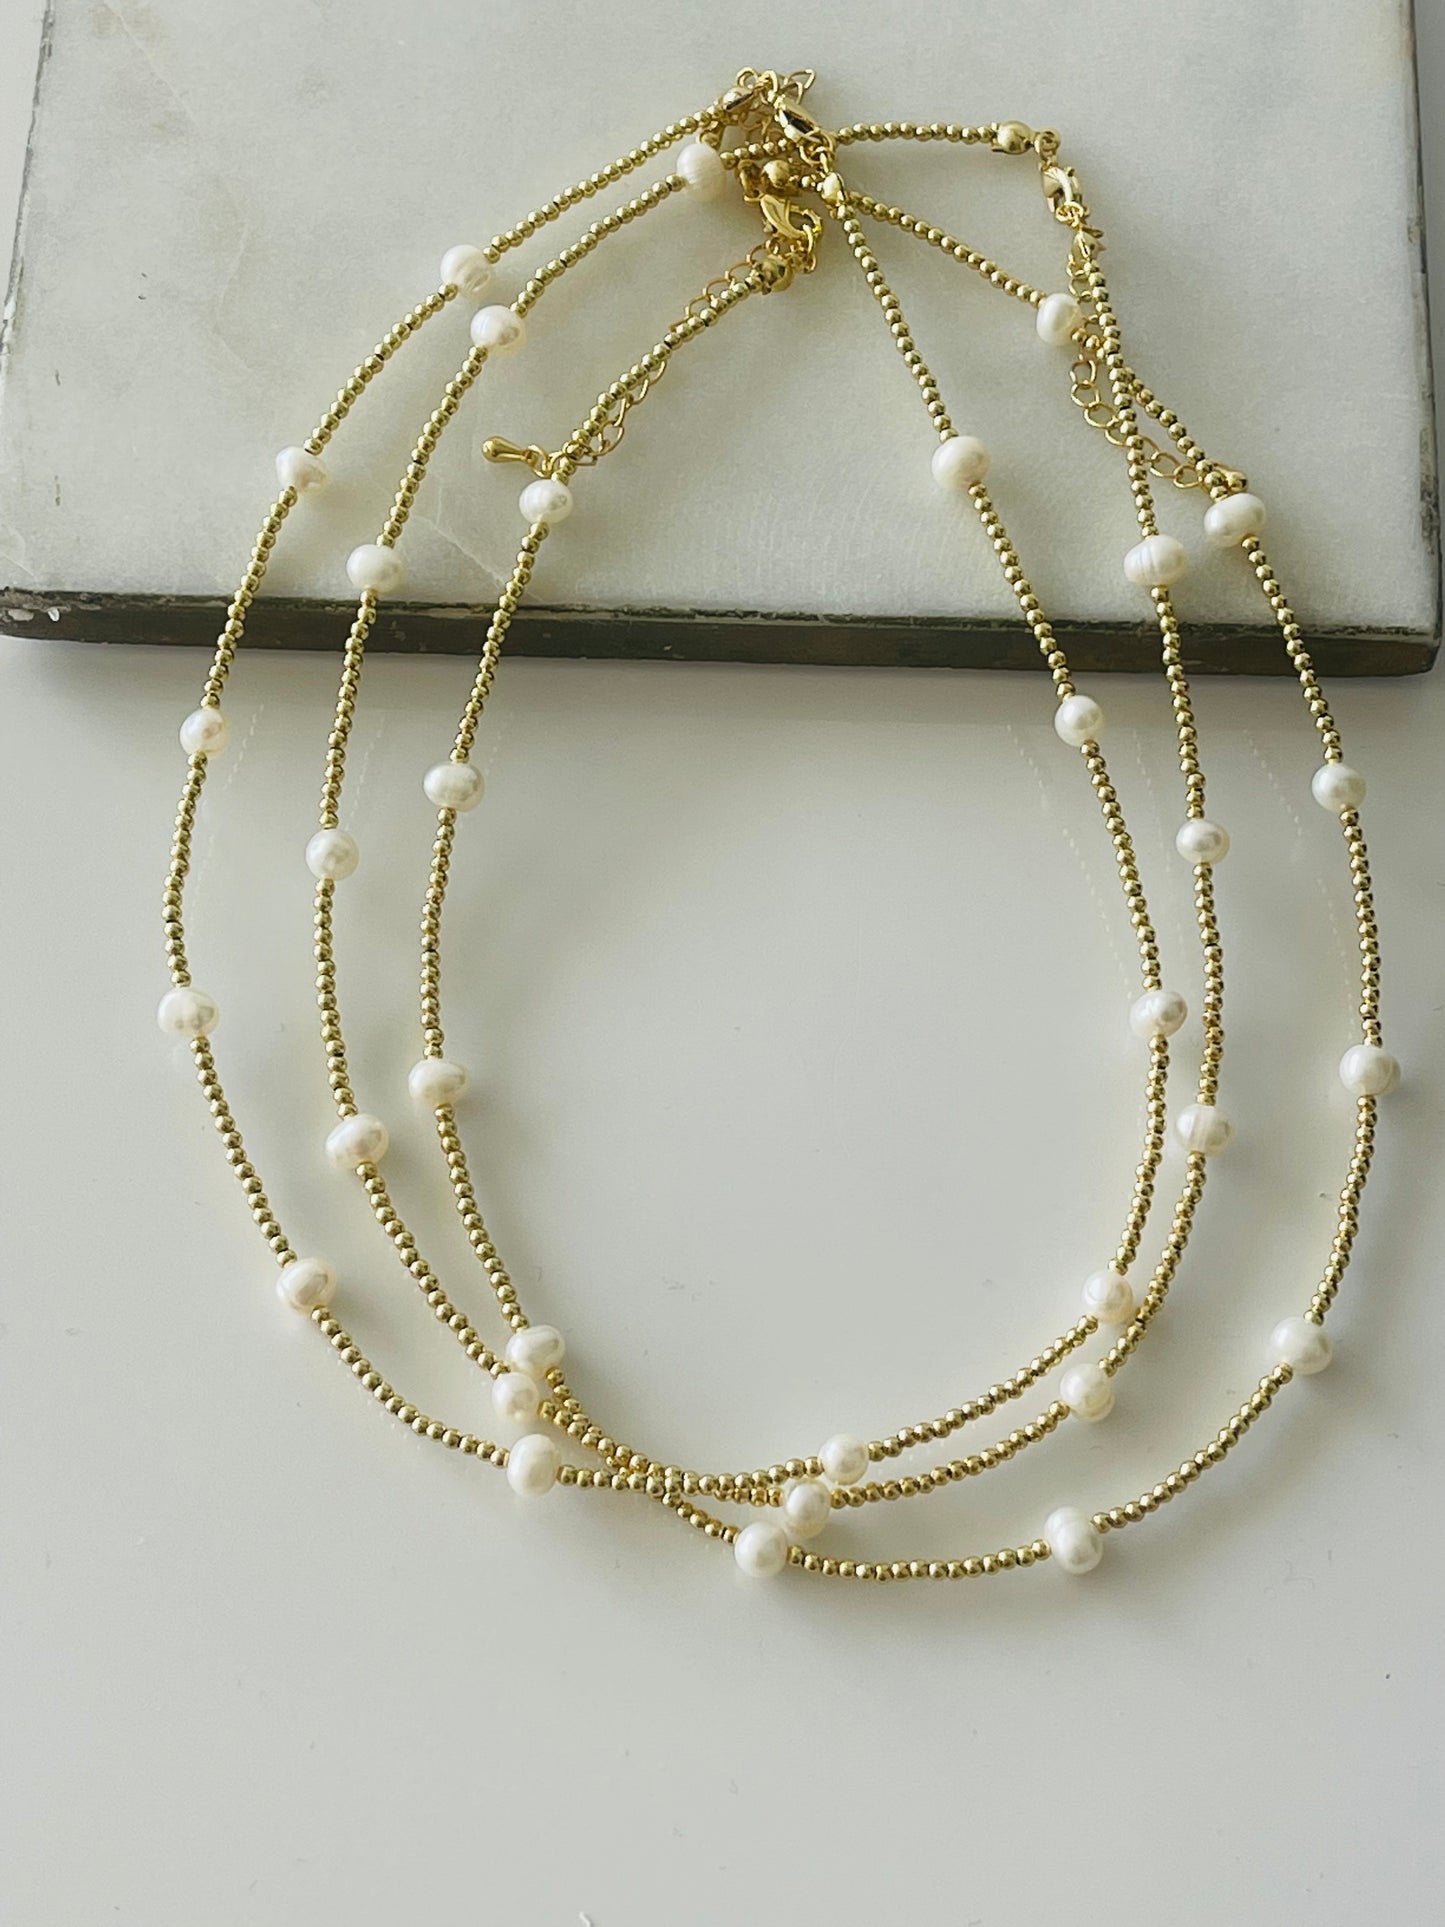 Beaded pearl necklace